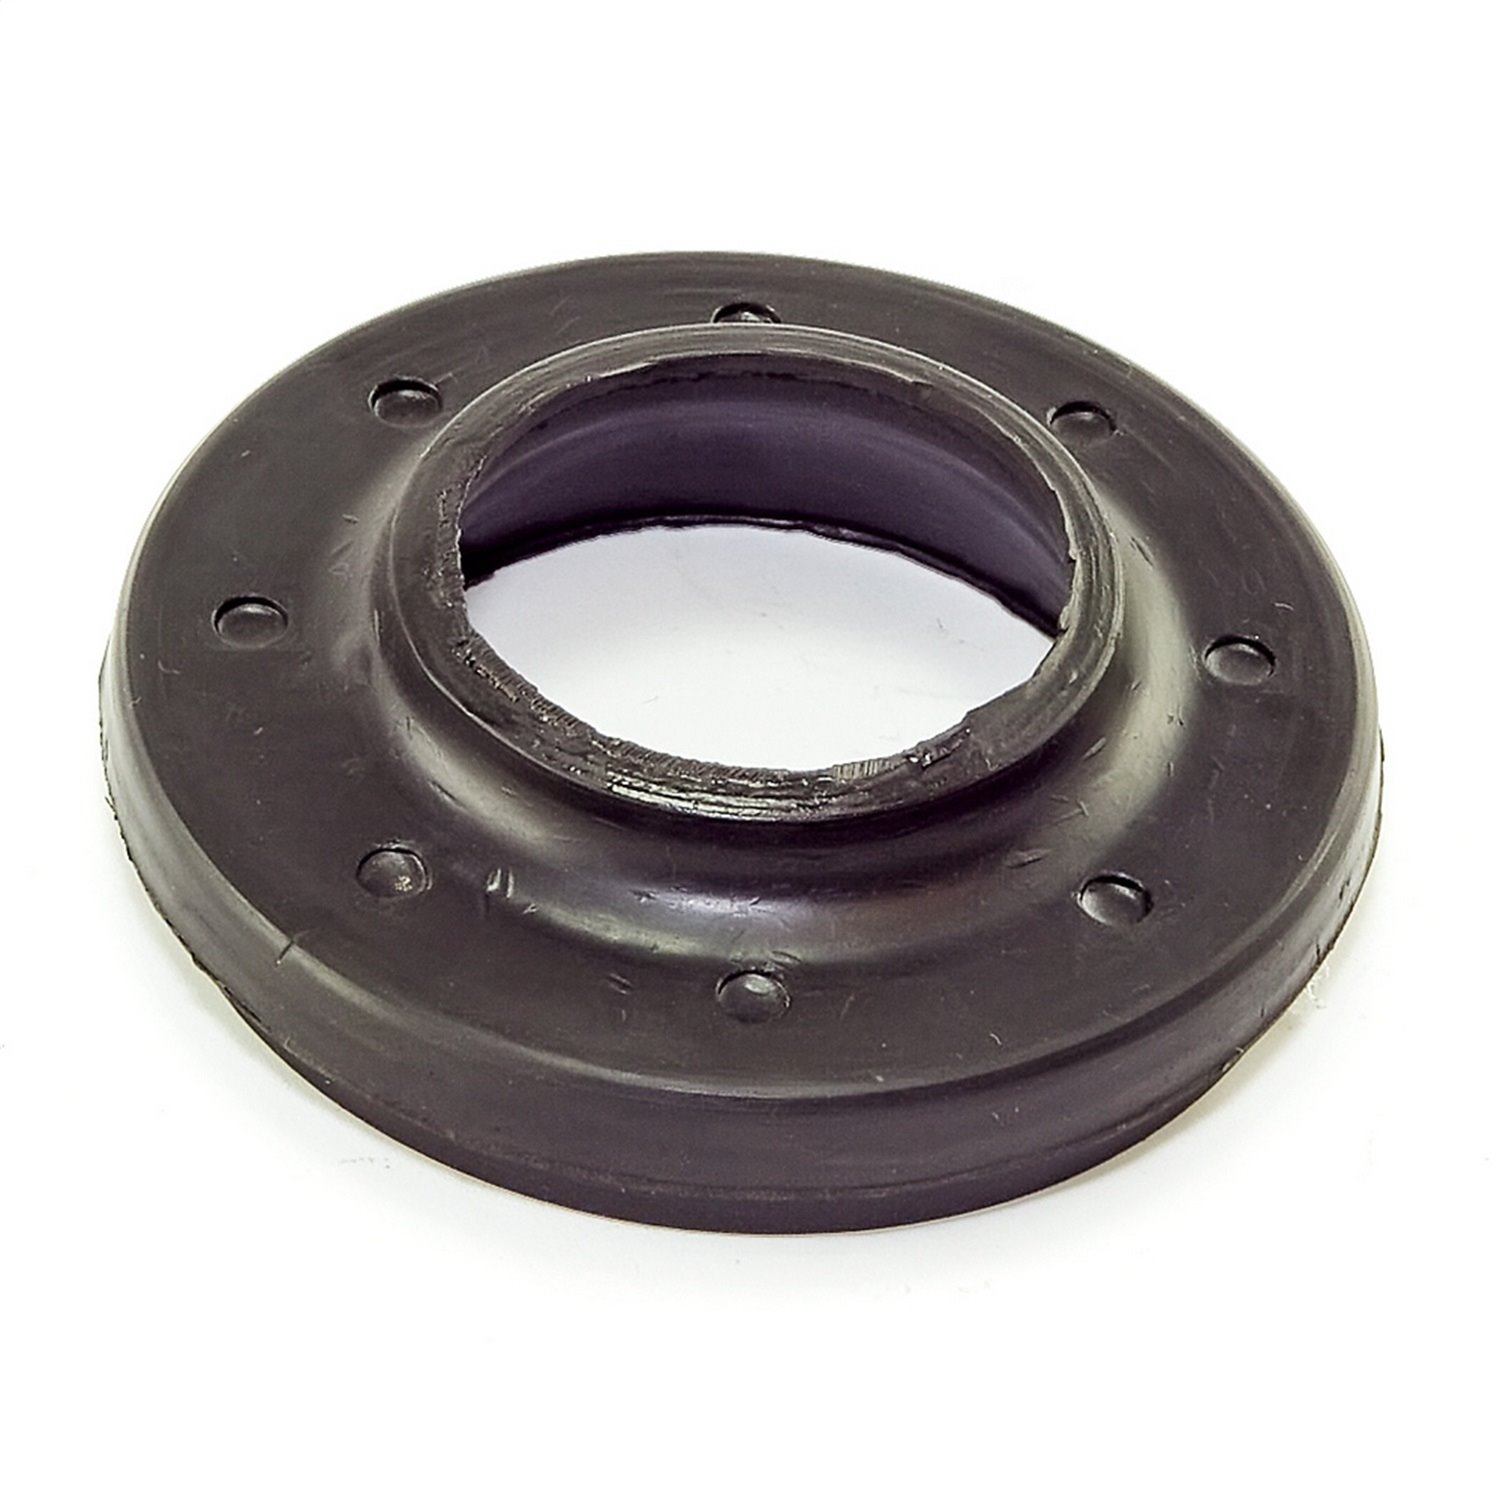 Stock replacement coil spring isolator from Omix-ADA, Fits